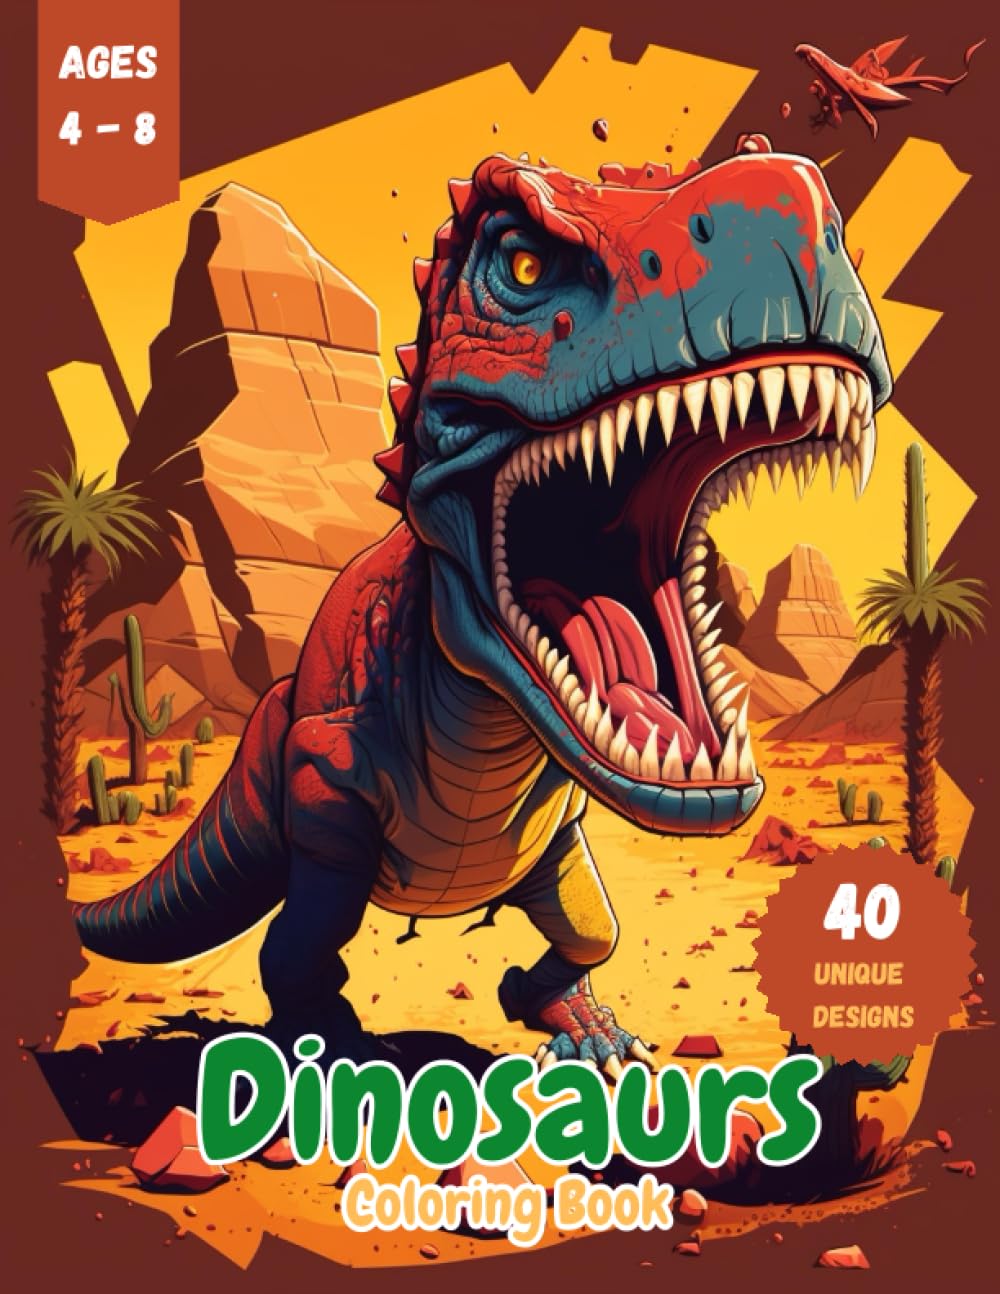 Dinosaurs Coloring Book for Kids ages 4-8